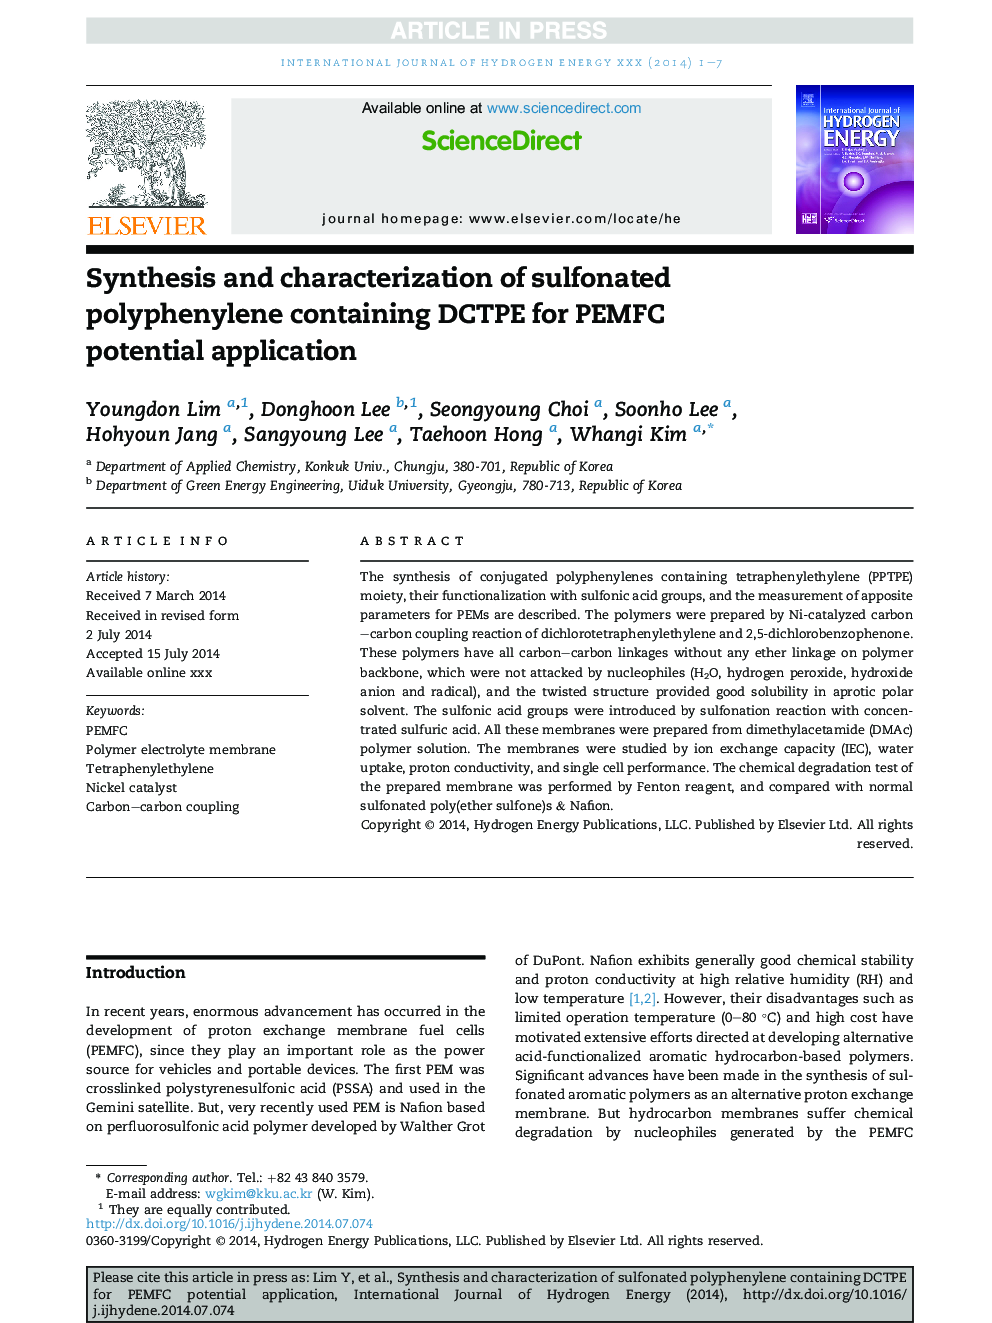 Synthesis and characterization of sulfonated polyphenylene containing DCTPE for PEMFC potential application